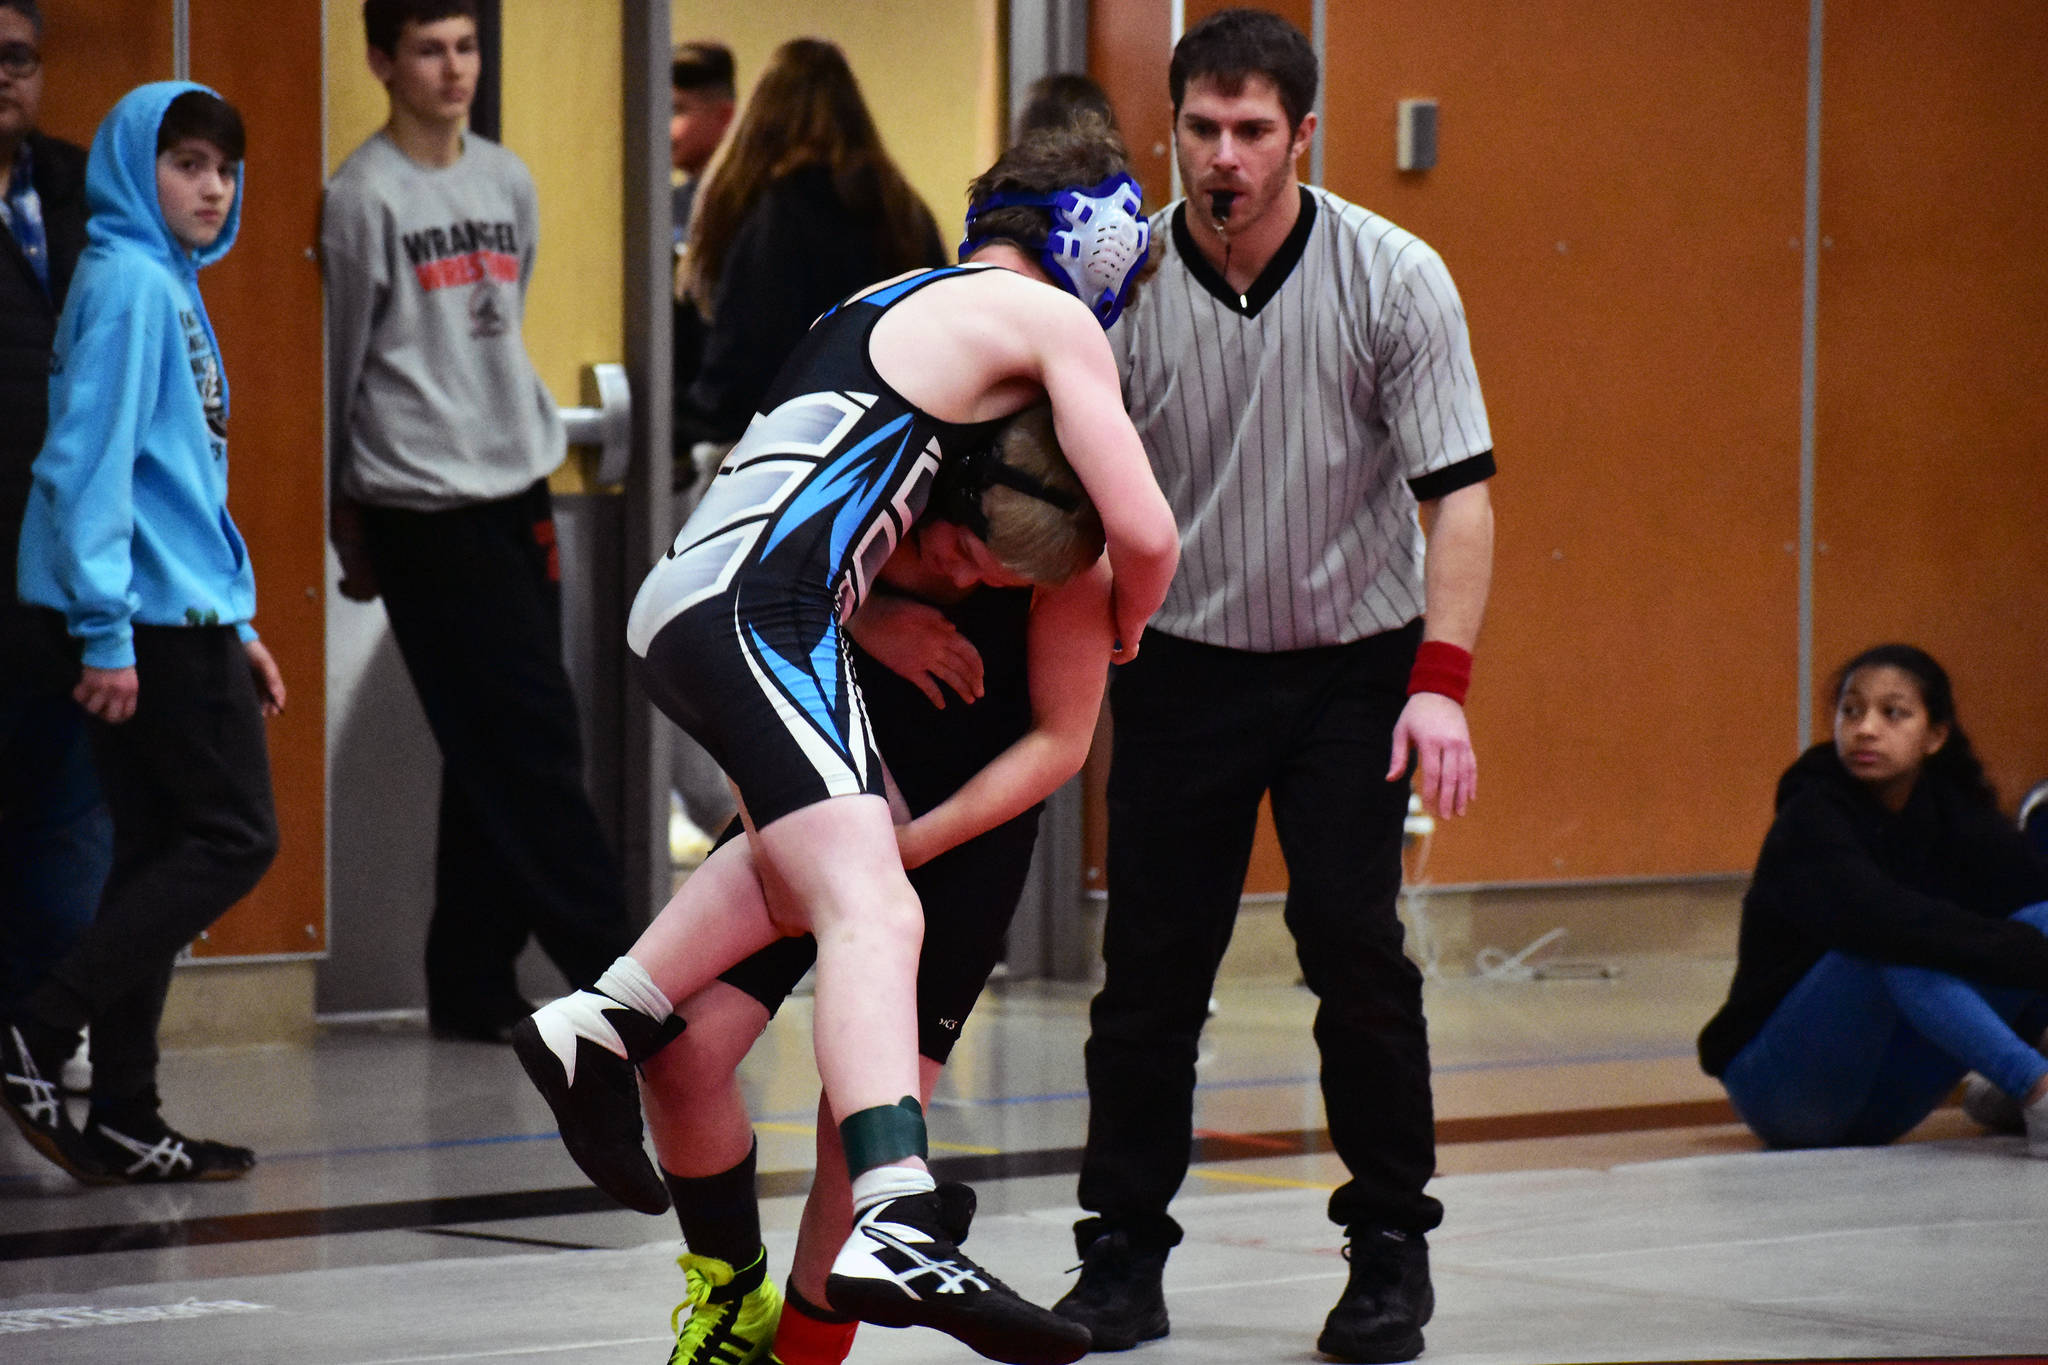 A referee watches as students wrestle at the 2020 Southeast Alaska Middle School Wrestling Tournament at Floyd Dryden Middle School on Friday. (Peter Segall | Juneau Empire)